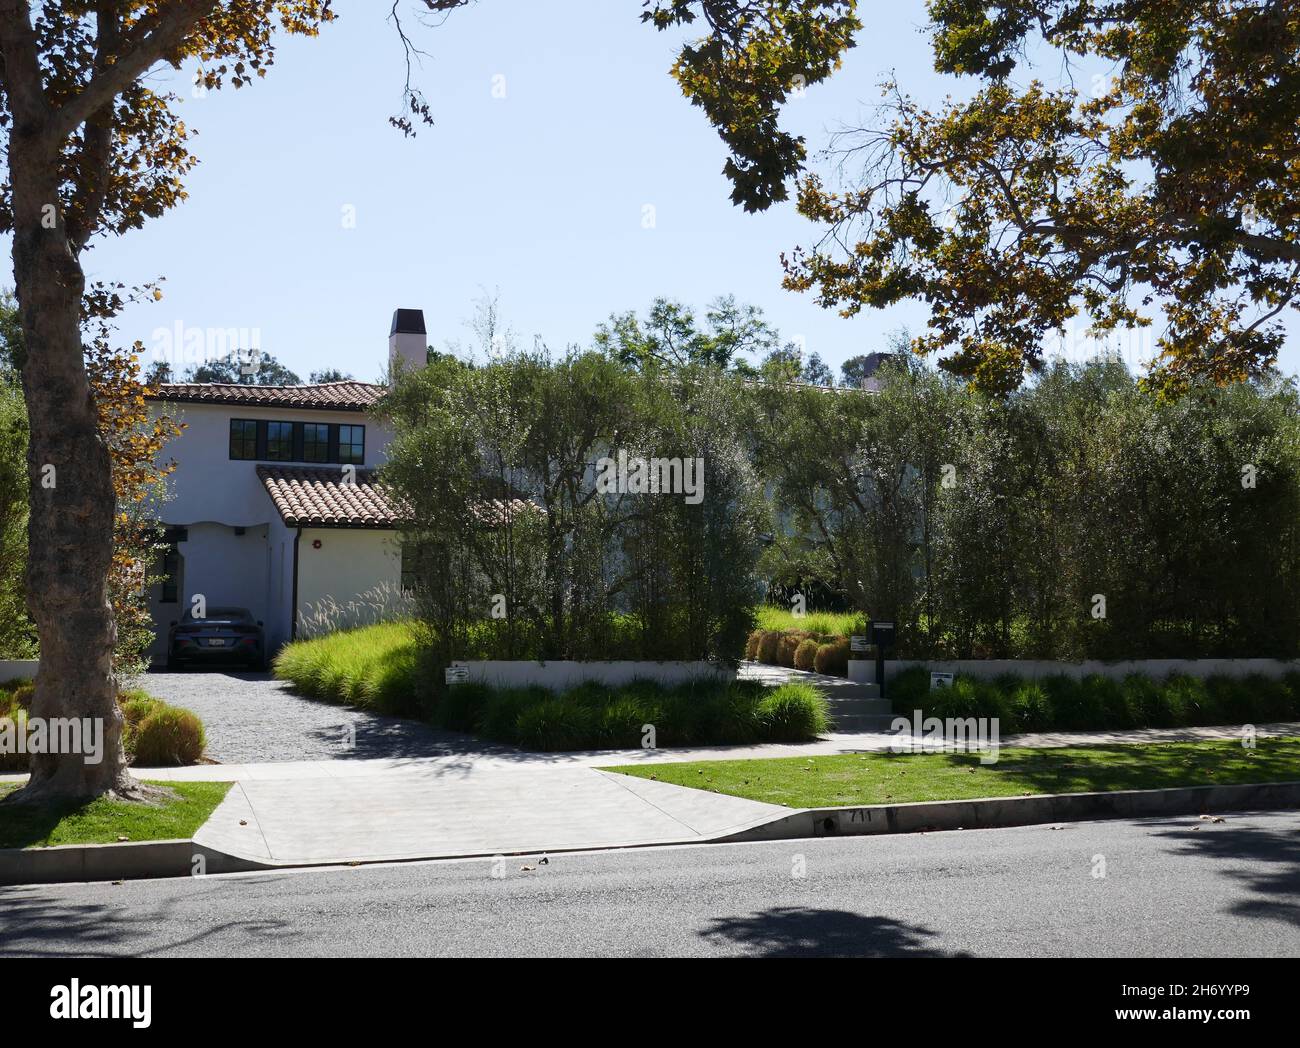 Beverly Hills, California, USA 18th September 2021 A general view of atmosphere of Actress Kim Delaney and Actress Joan Benny's Former Home/house at 711 Walden Drive on September 18, 2021 in Beverly Hills, California, USA. Photo by Barry King/Alamy Stock Photo Stock Photo